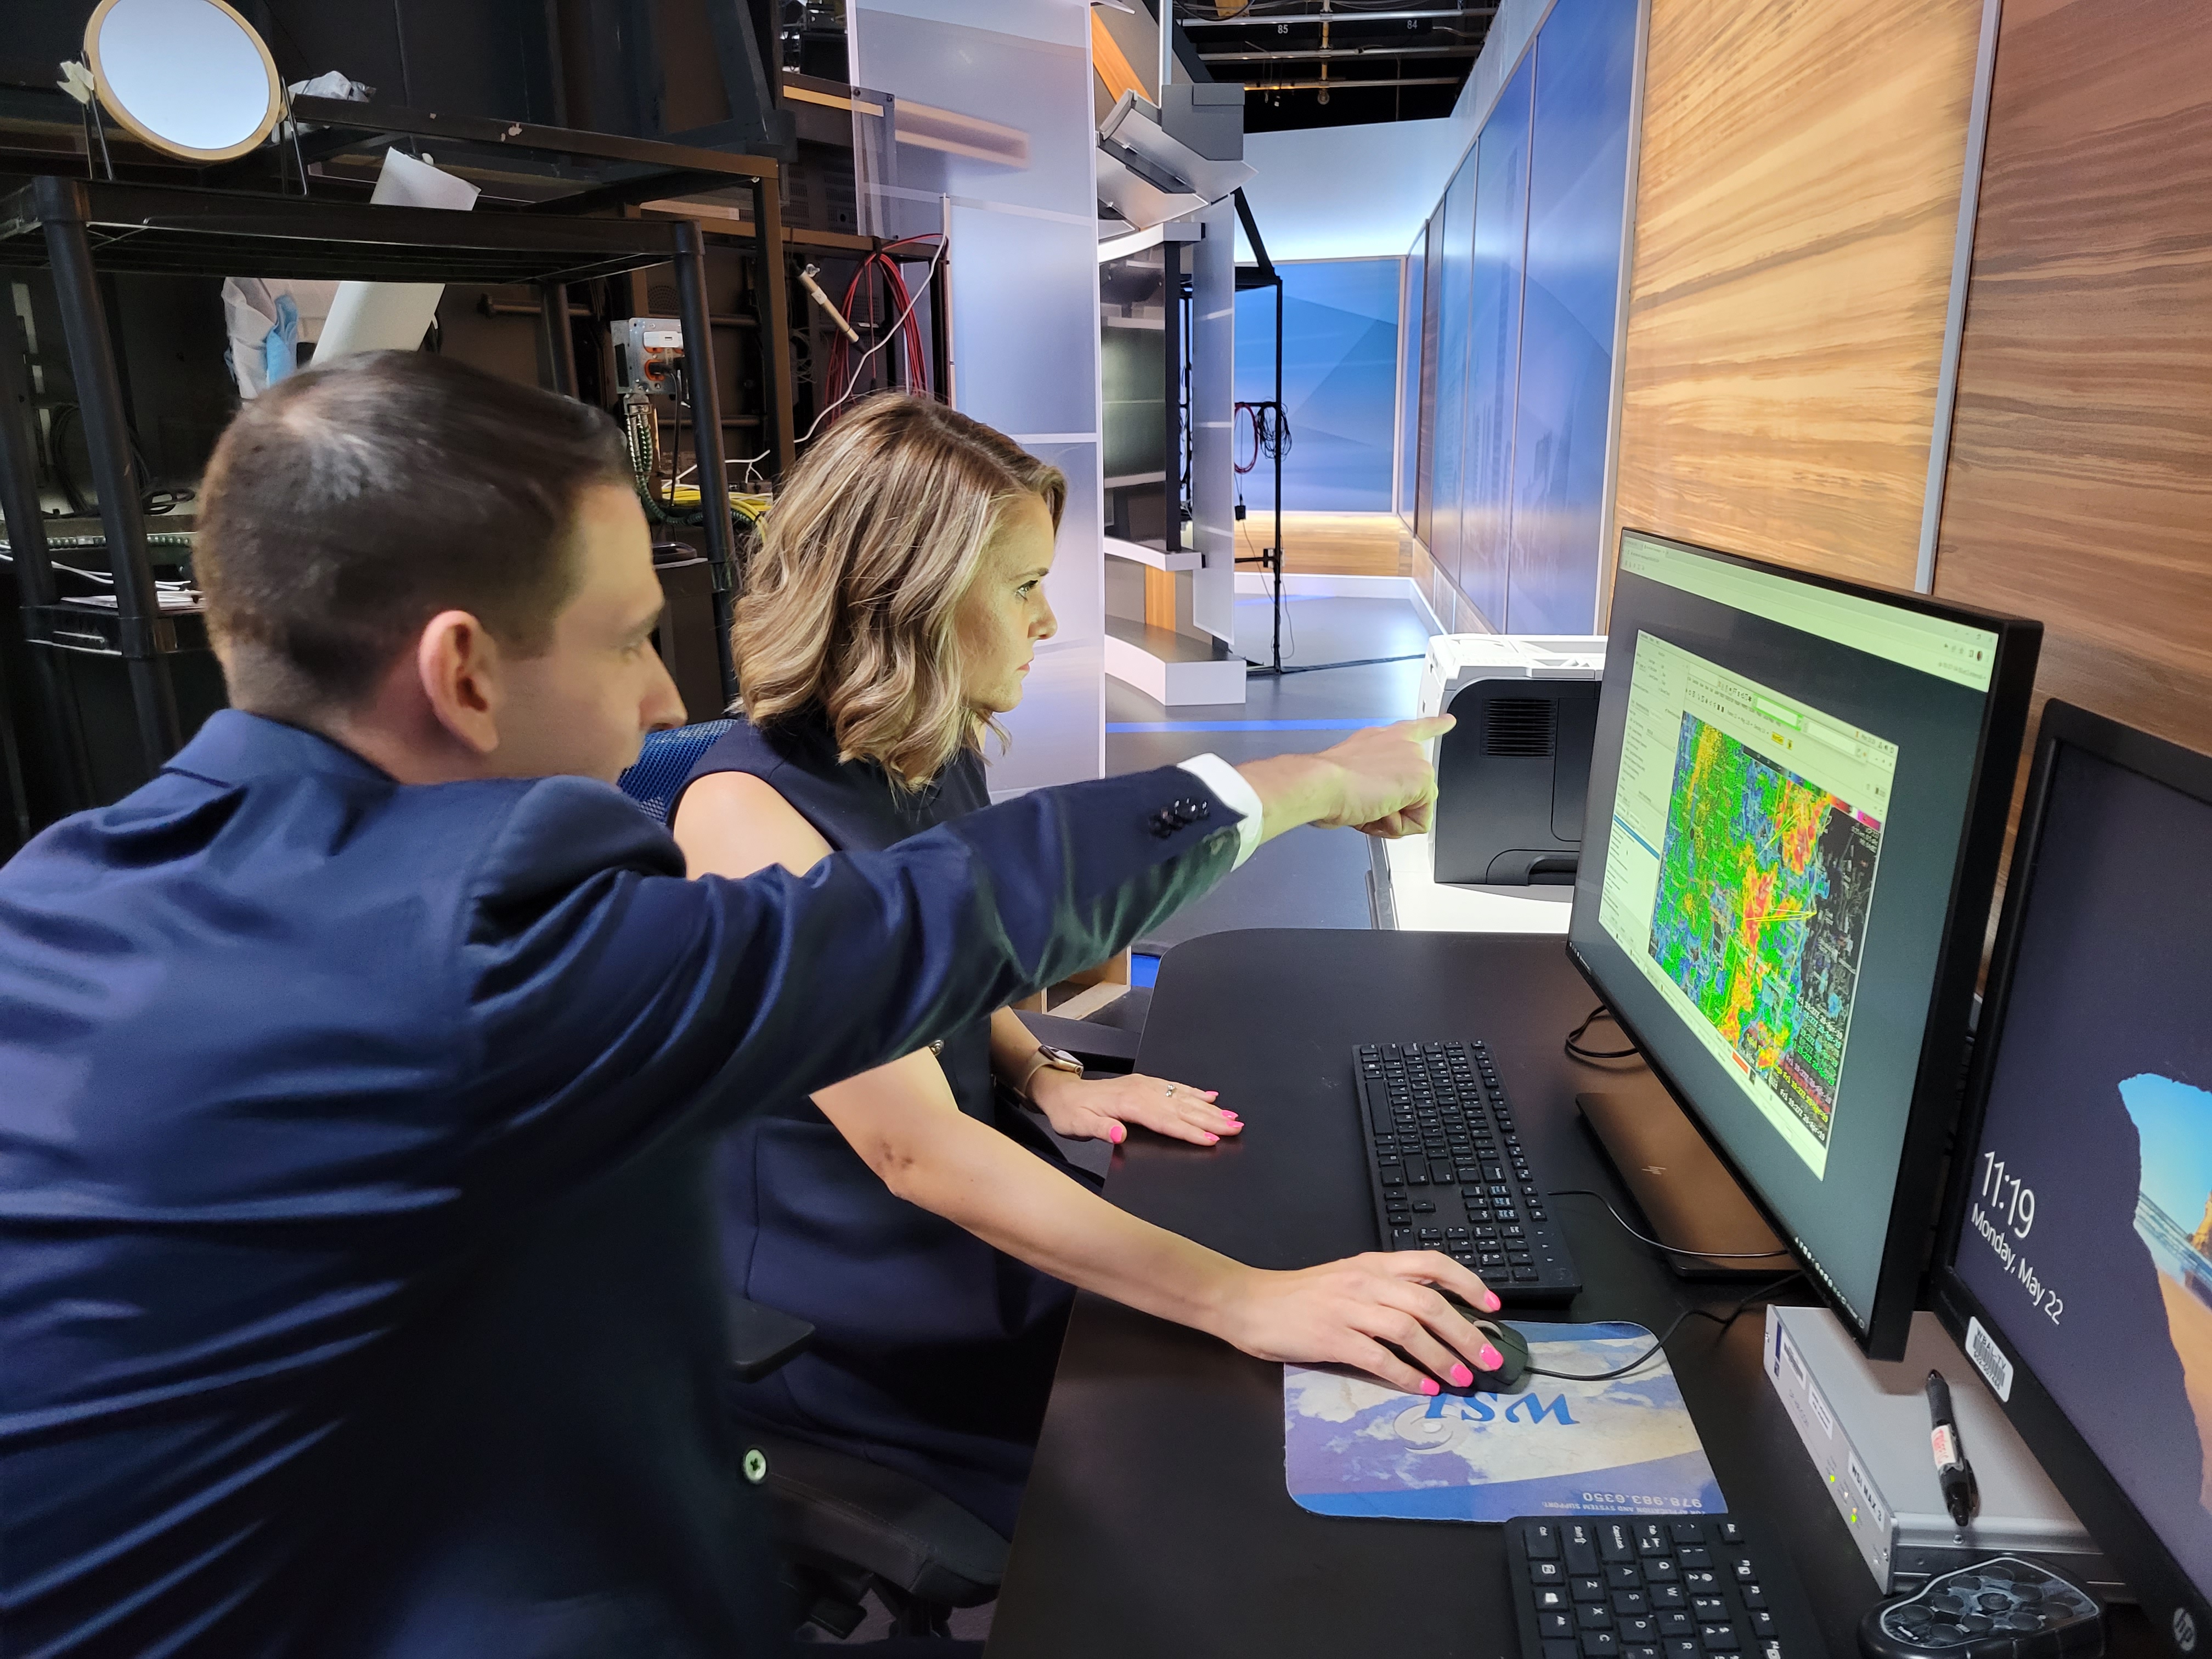 WBAL-TV 11 Morning Meteorologist Ava Marie goes through the process of drawing up a warning using WarnGen for a simulated event that occurred April 26